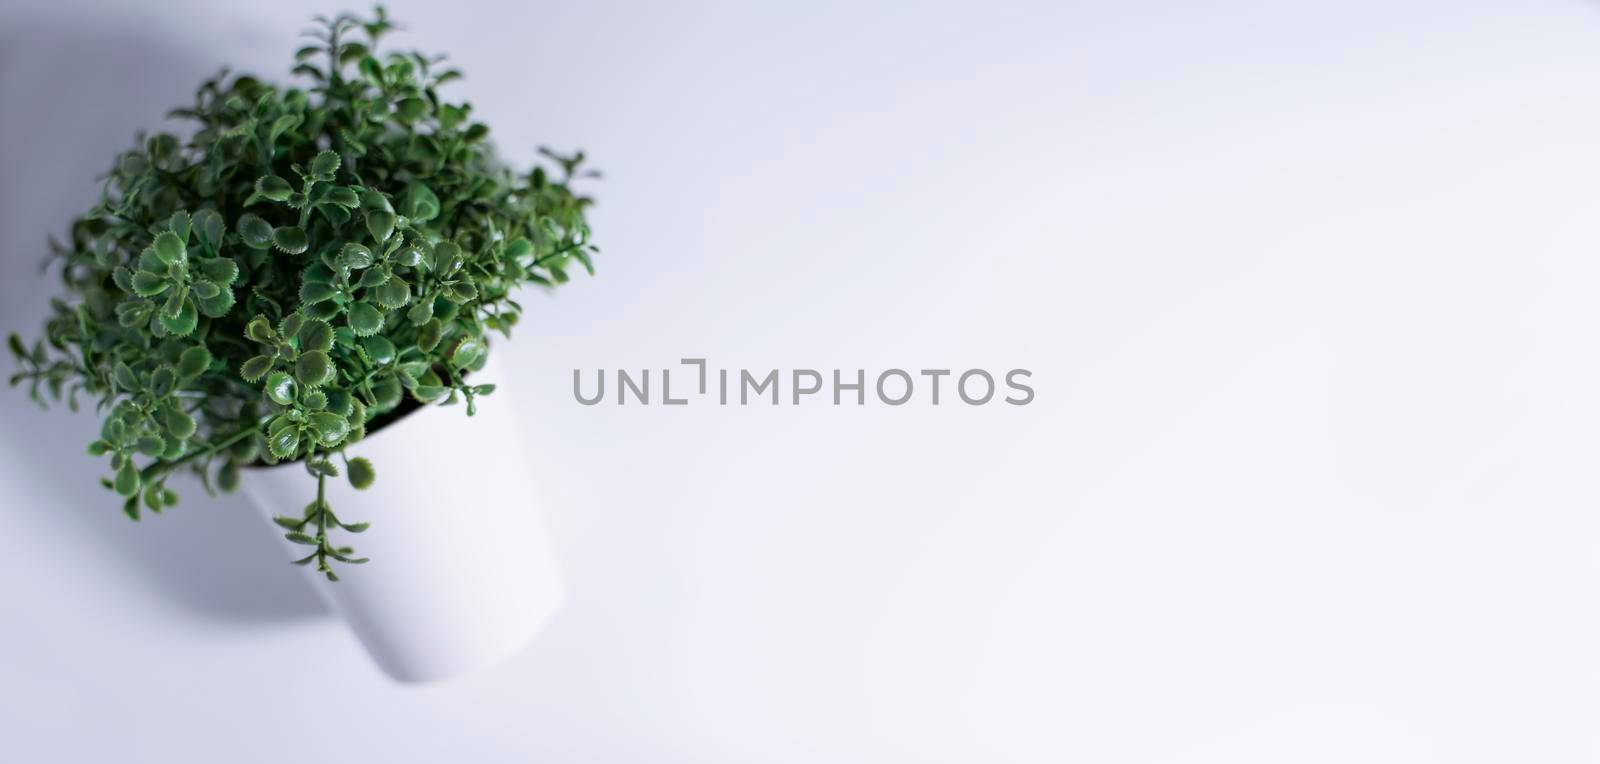 advertising concept with green succulent plant in pot on white and gray background with copy space, side view.